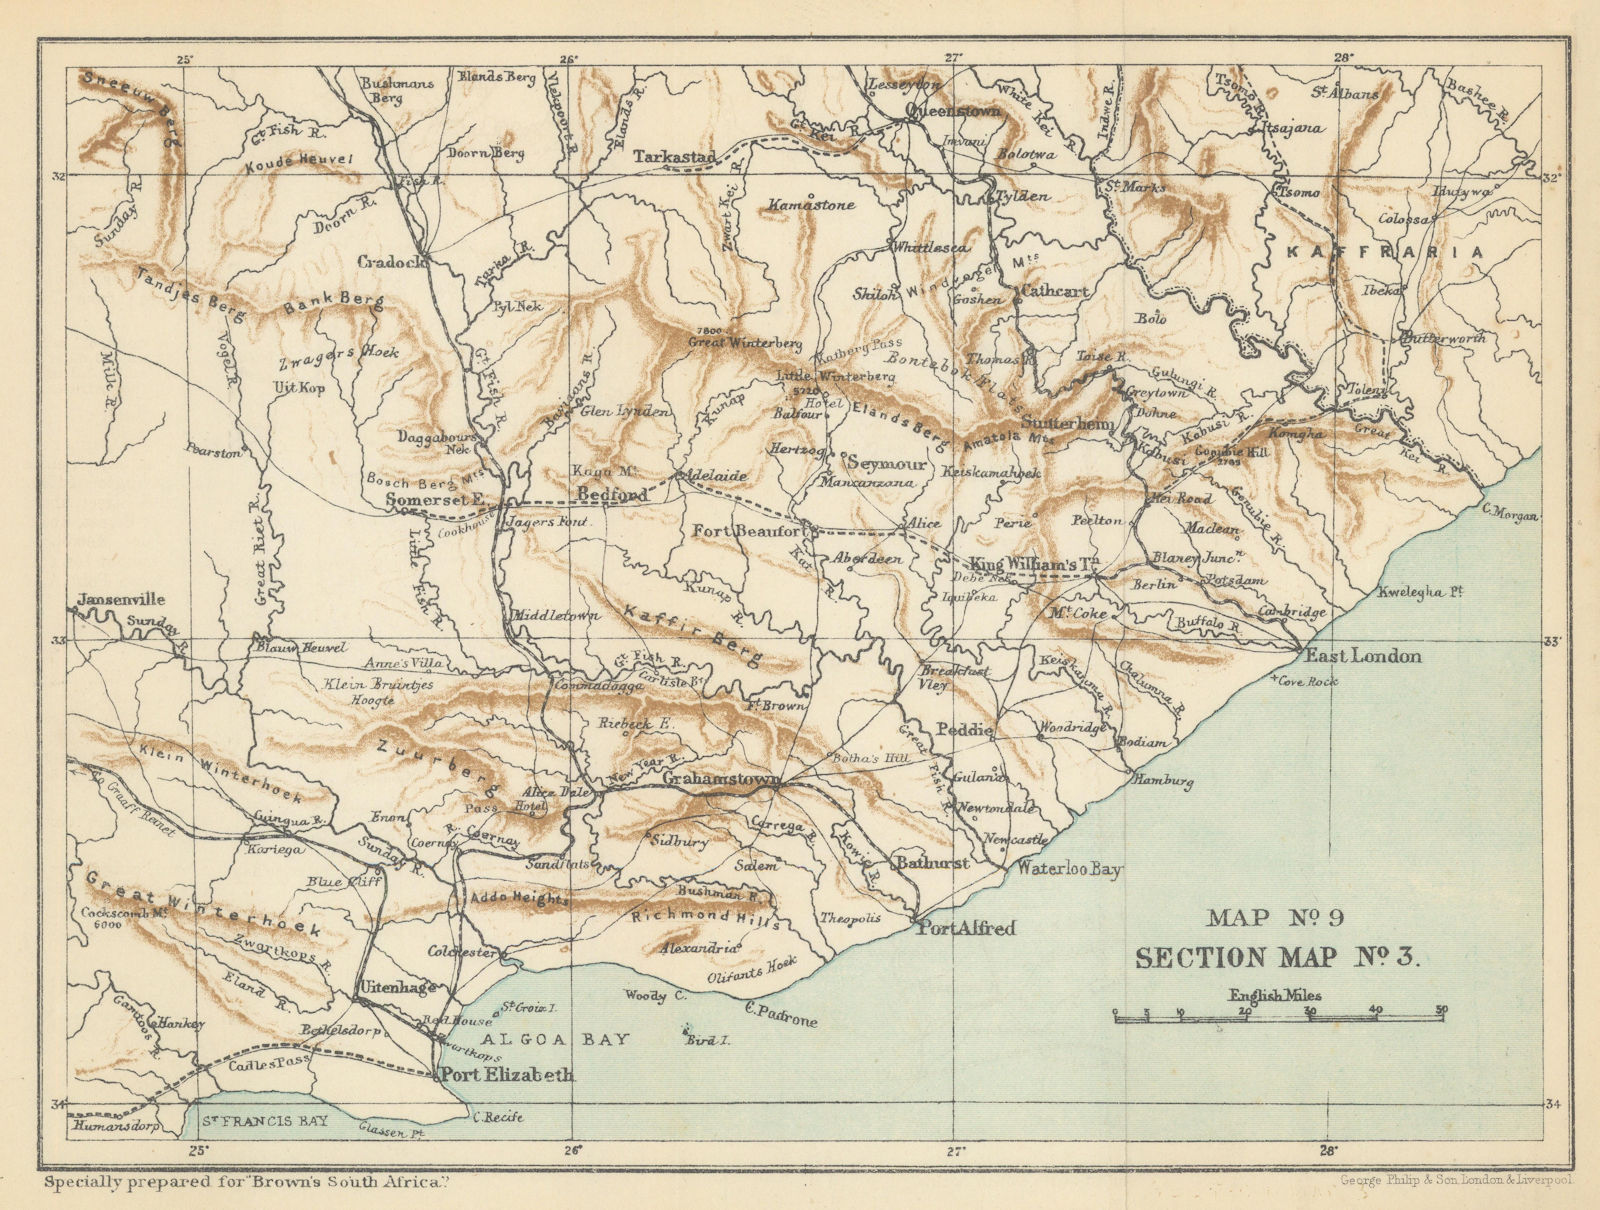 Associate Product South Africa - Eastern Southern Provinces of Cape Colony. SAMLER BROWN 1899 map